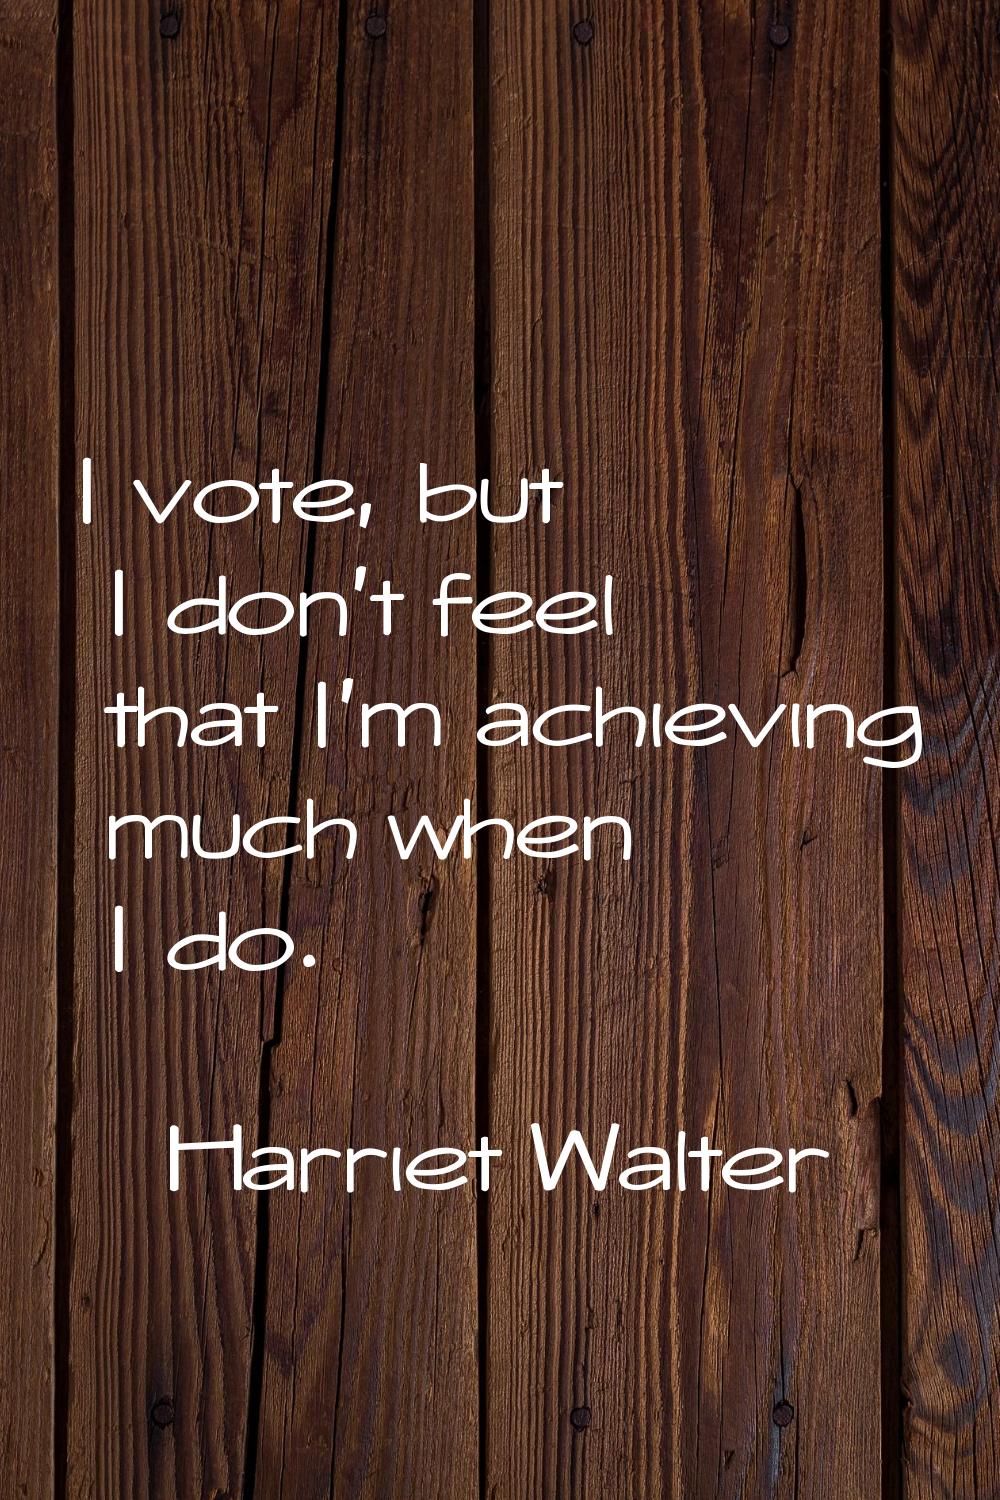 I vote, but I don't feel that I'm achieving much when I do.